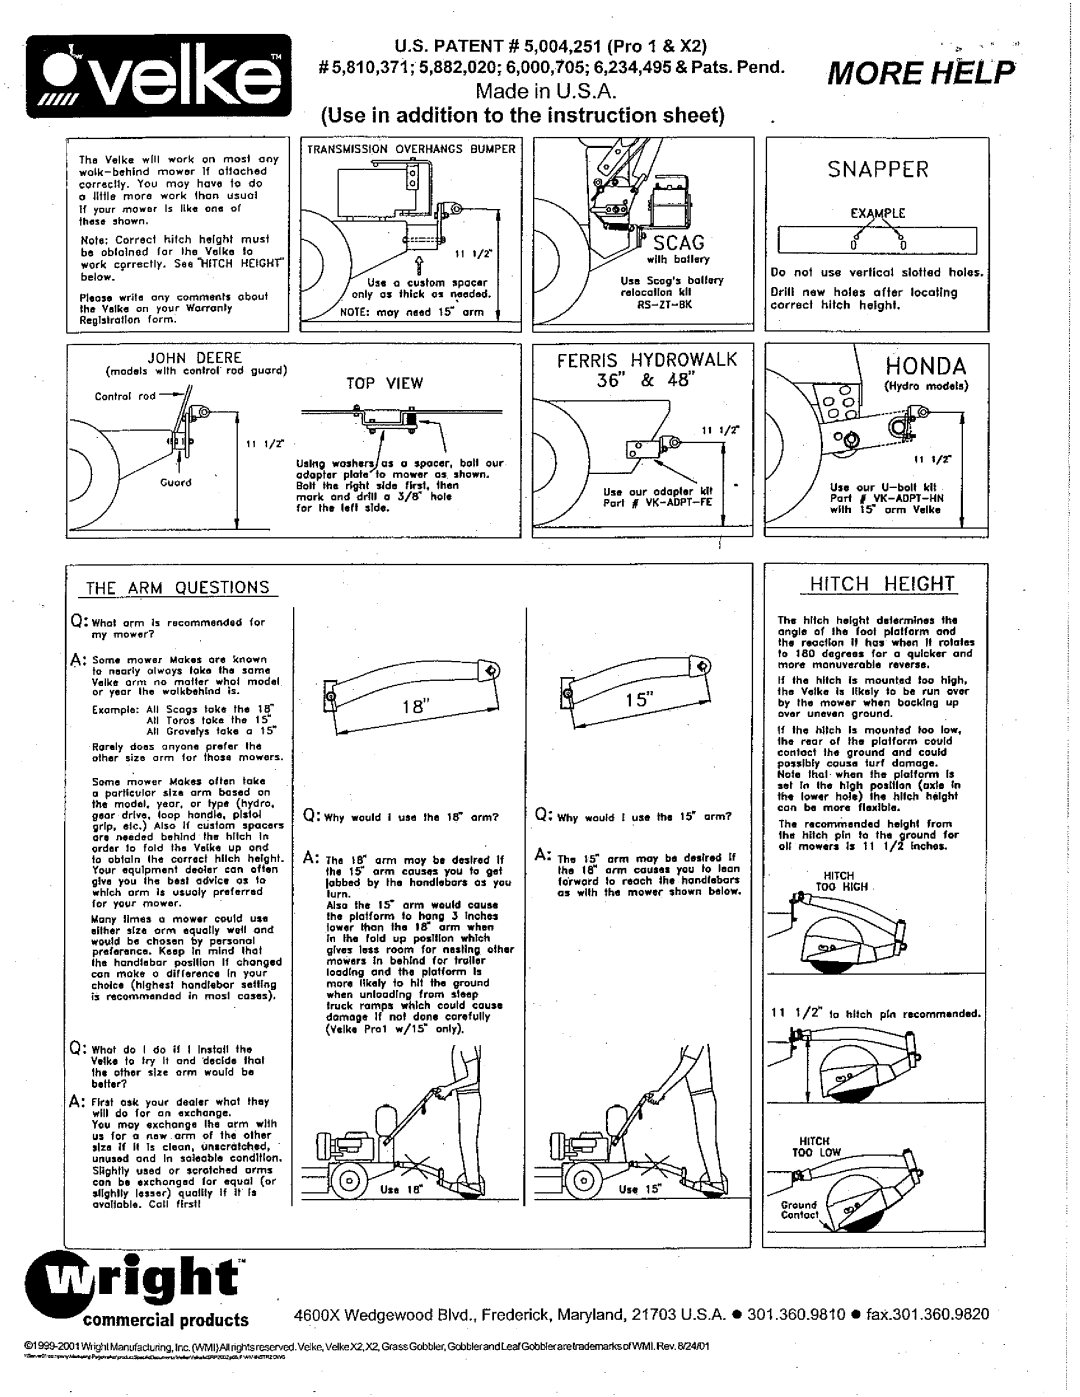 Wright Manufacturing VK200-2, SC, B)-15 installation instructions 